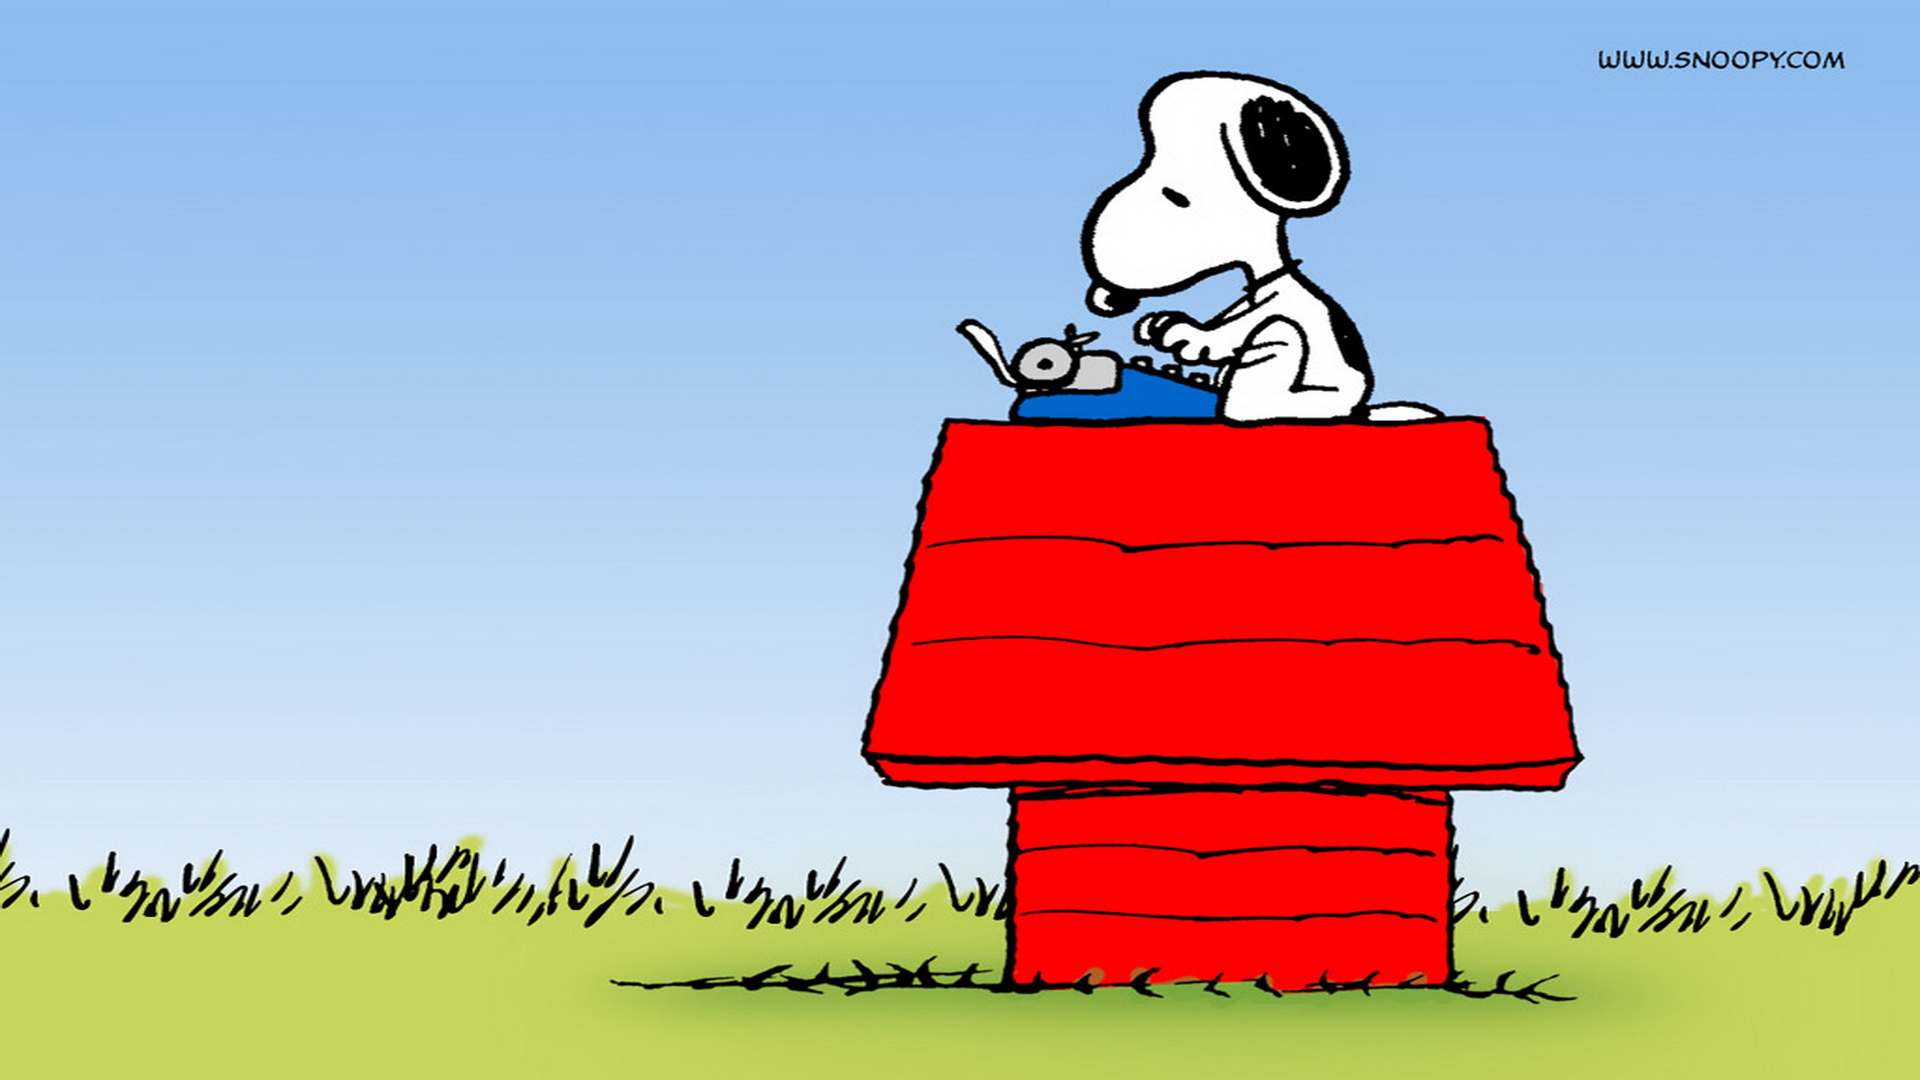 Snoopy Wallpapers Hd A3 - Charles Schulz Friendship Quotes , HD Wallpaper & Backgrounds